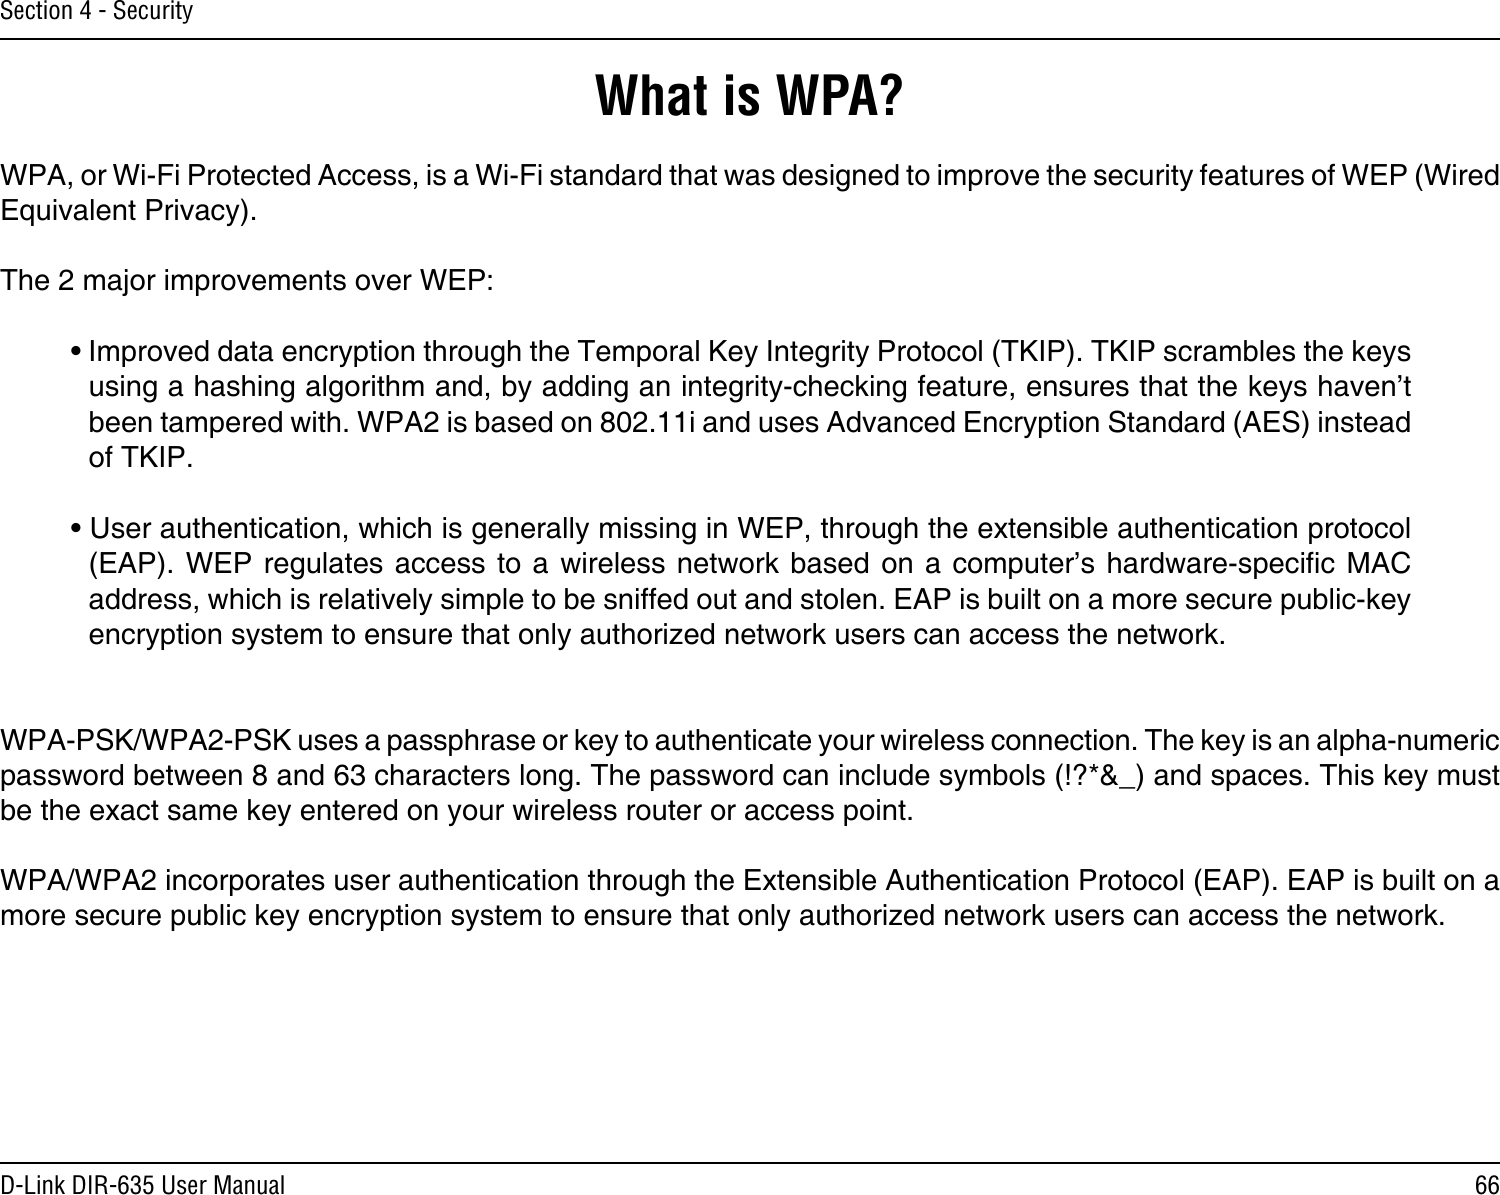 66D-Link DIR-635 User ManualSection 4 - SecurityWhat is WPA?WPA, or Wi-Fi Protected Access, is a Wi-Fi standard that was designed to improve the security features of WEP (Wired Equivalent Privacy).  The 2 major improvements over WEP: • Improved data encryption through the Temporal Key Integrity Protocol (TKIP). TKIP scrambles the keys using a hashing algorithm and, by adding an integrity-checking feature, ensures that the keys haven’t been tampered with. WPA2 is based on 802.11i and uses Advanced Encryption Standard (AES) instead of TKIP.• User authentication, which is generally missing in WEP, through the extensible authentication protocol (EAP). WEP  regulates access to  a wireless network  based on a  computer’s hardware-specic MAC address, which is relatively simple to be sniffed out and stolen. EAP is built on a more secure public-key encryption system to ensure that only authorized network users can access the network.WPA-PSK/WPA2-PSK uses a passphrase or key to authenticate your wireless connection. The key is an alpha-numeric password between 8 and 63 characters long. The password can include symbols (!?*&amp;_) and spaces. This key must be the exact same key entered on your wireless router or access point.WPA/WPA2 incorporates user authentication through the Extensible Authentication Protocol (EAP). EAP is built on a more secure public key encryption system to ensure that only authorized network users can access the network.